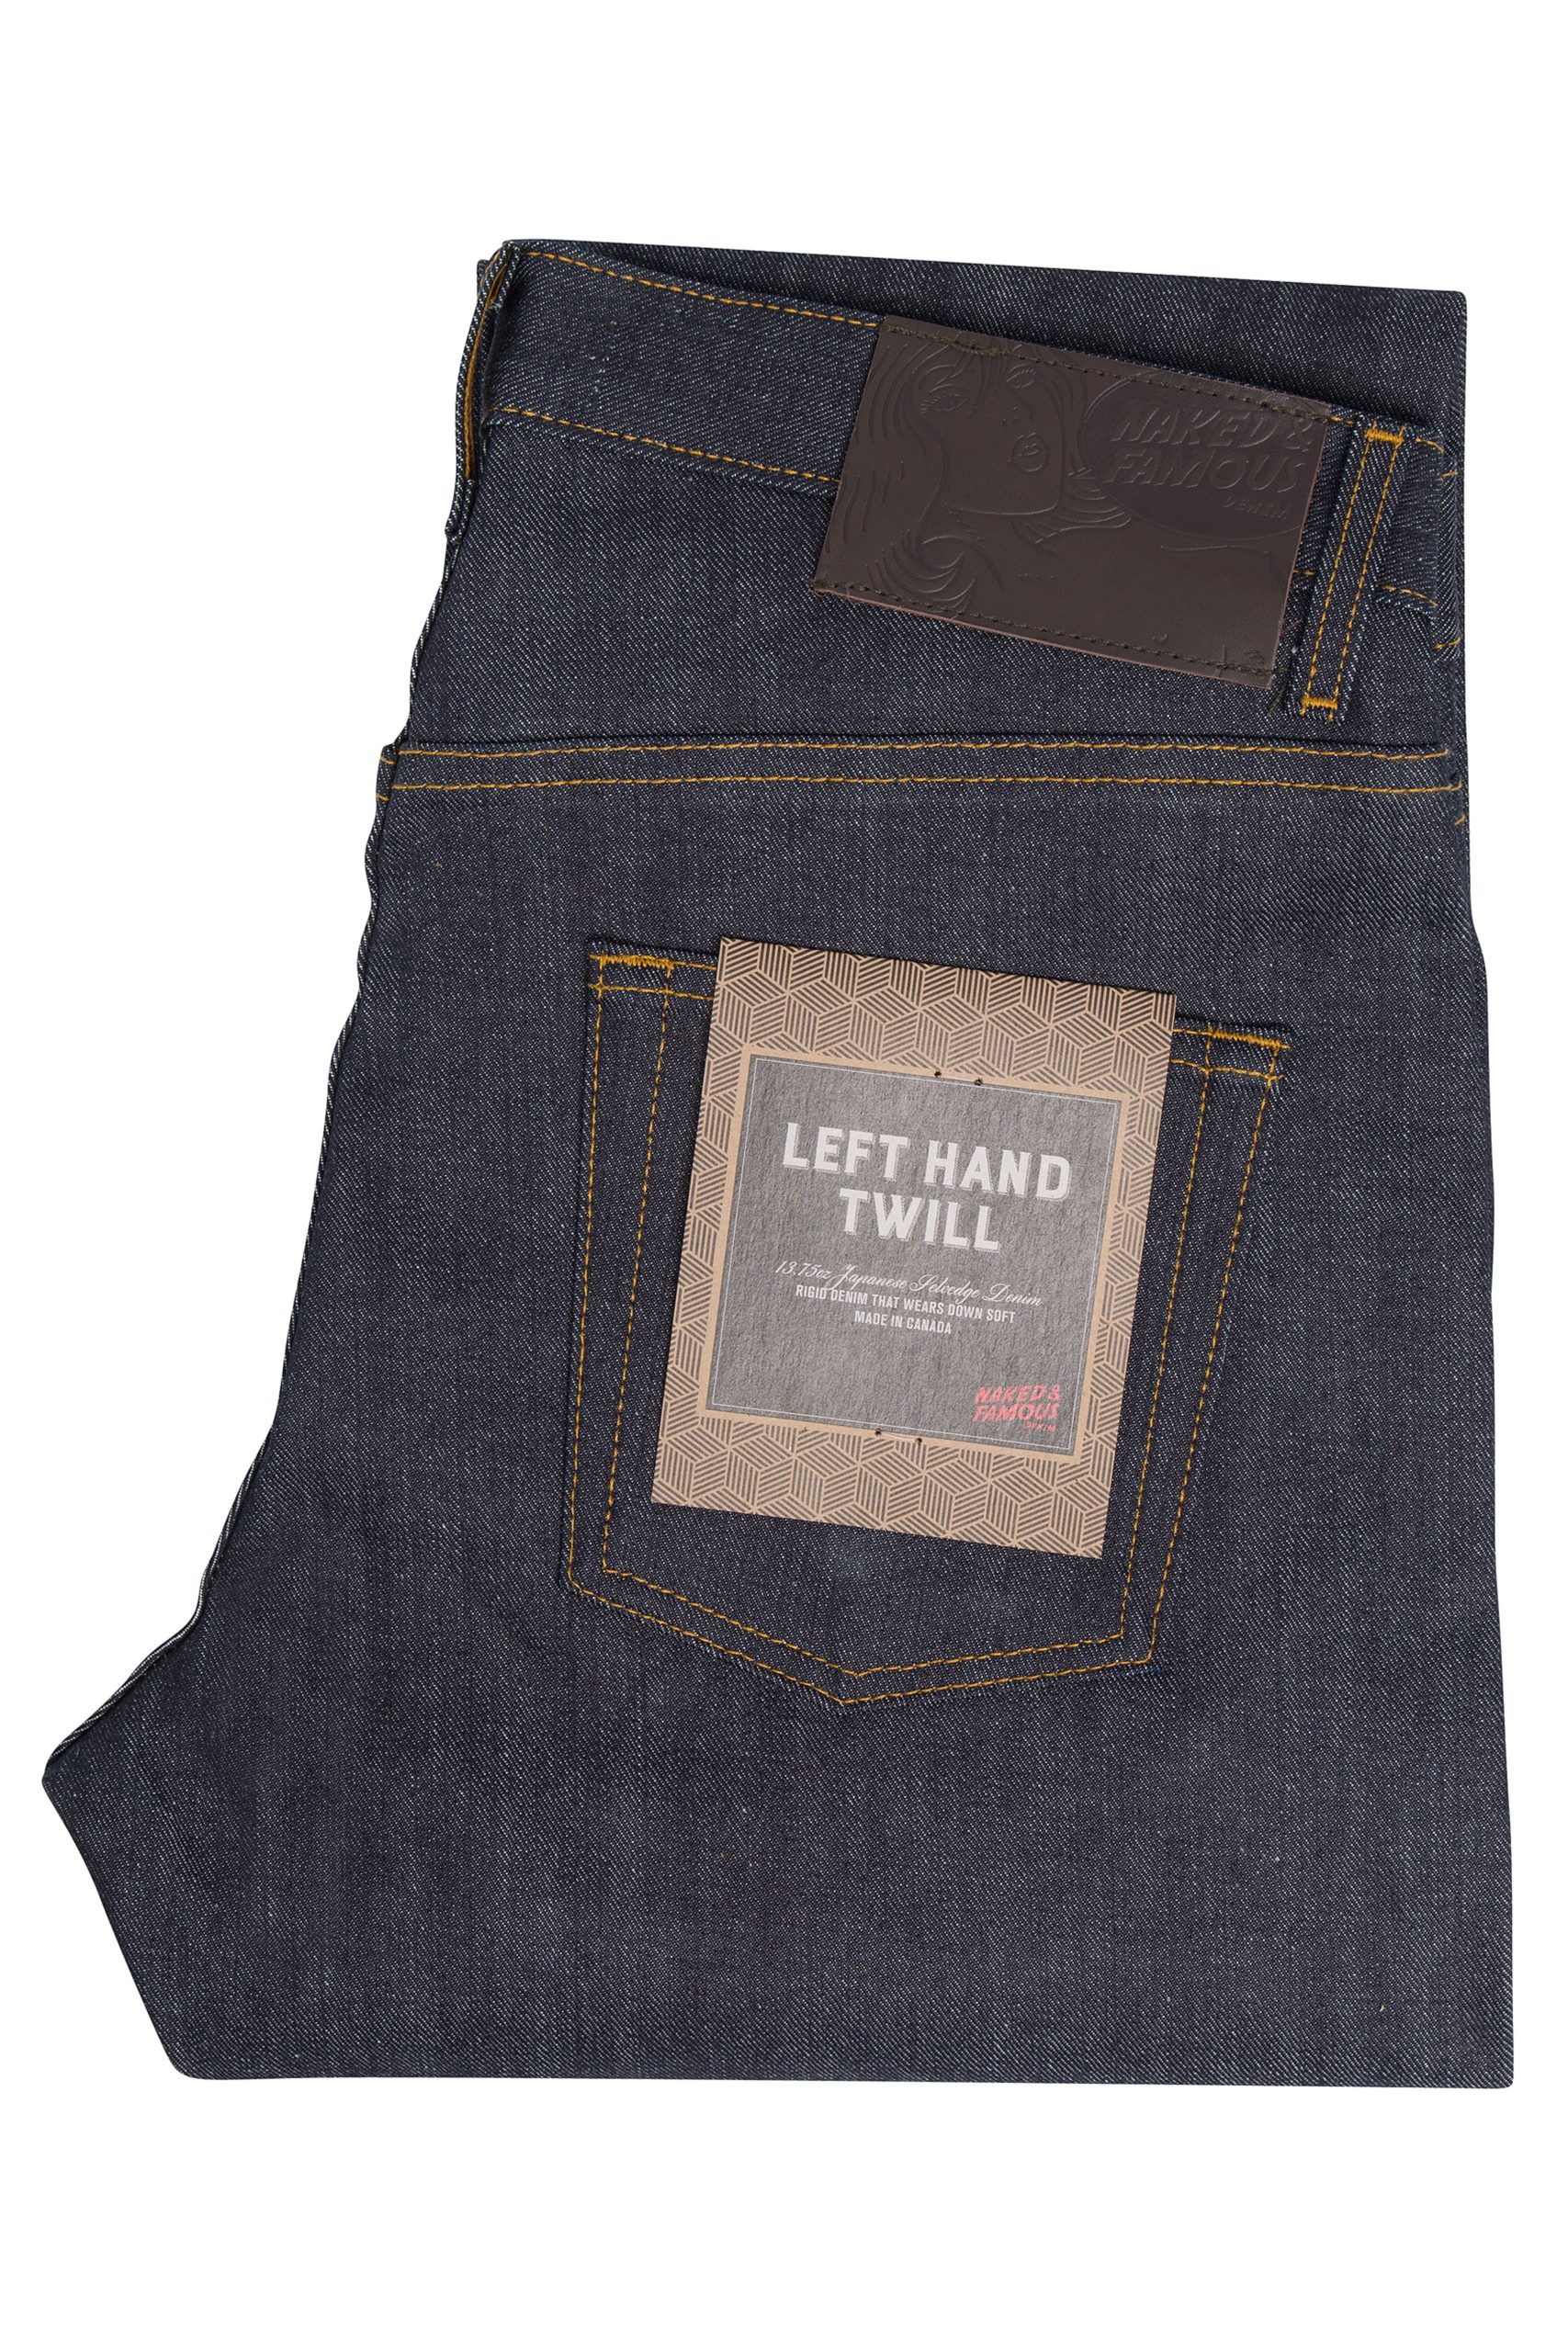 NAKED and FAMOUS Jeans Easy guy LEFT HAND TWILL SELVEDGE INDIGO